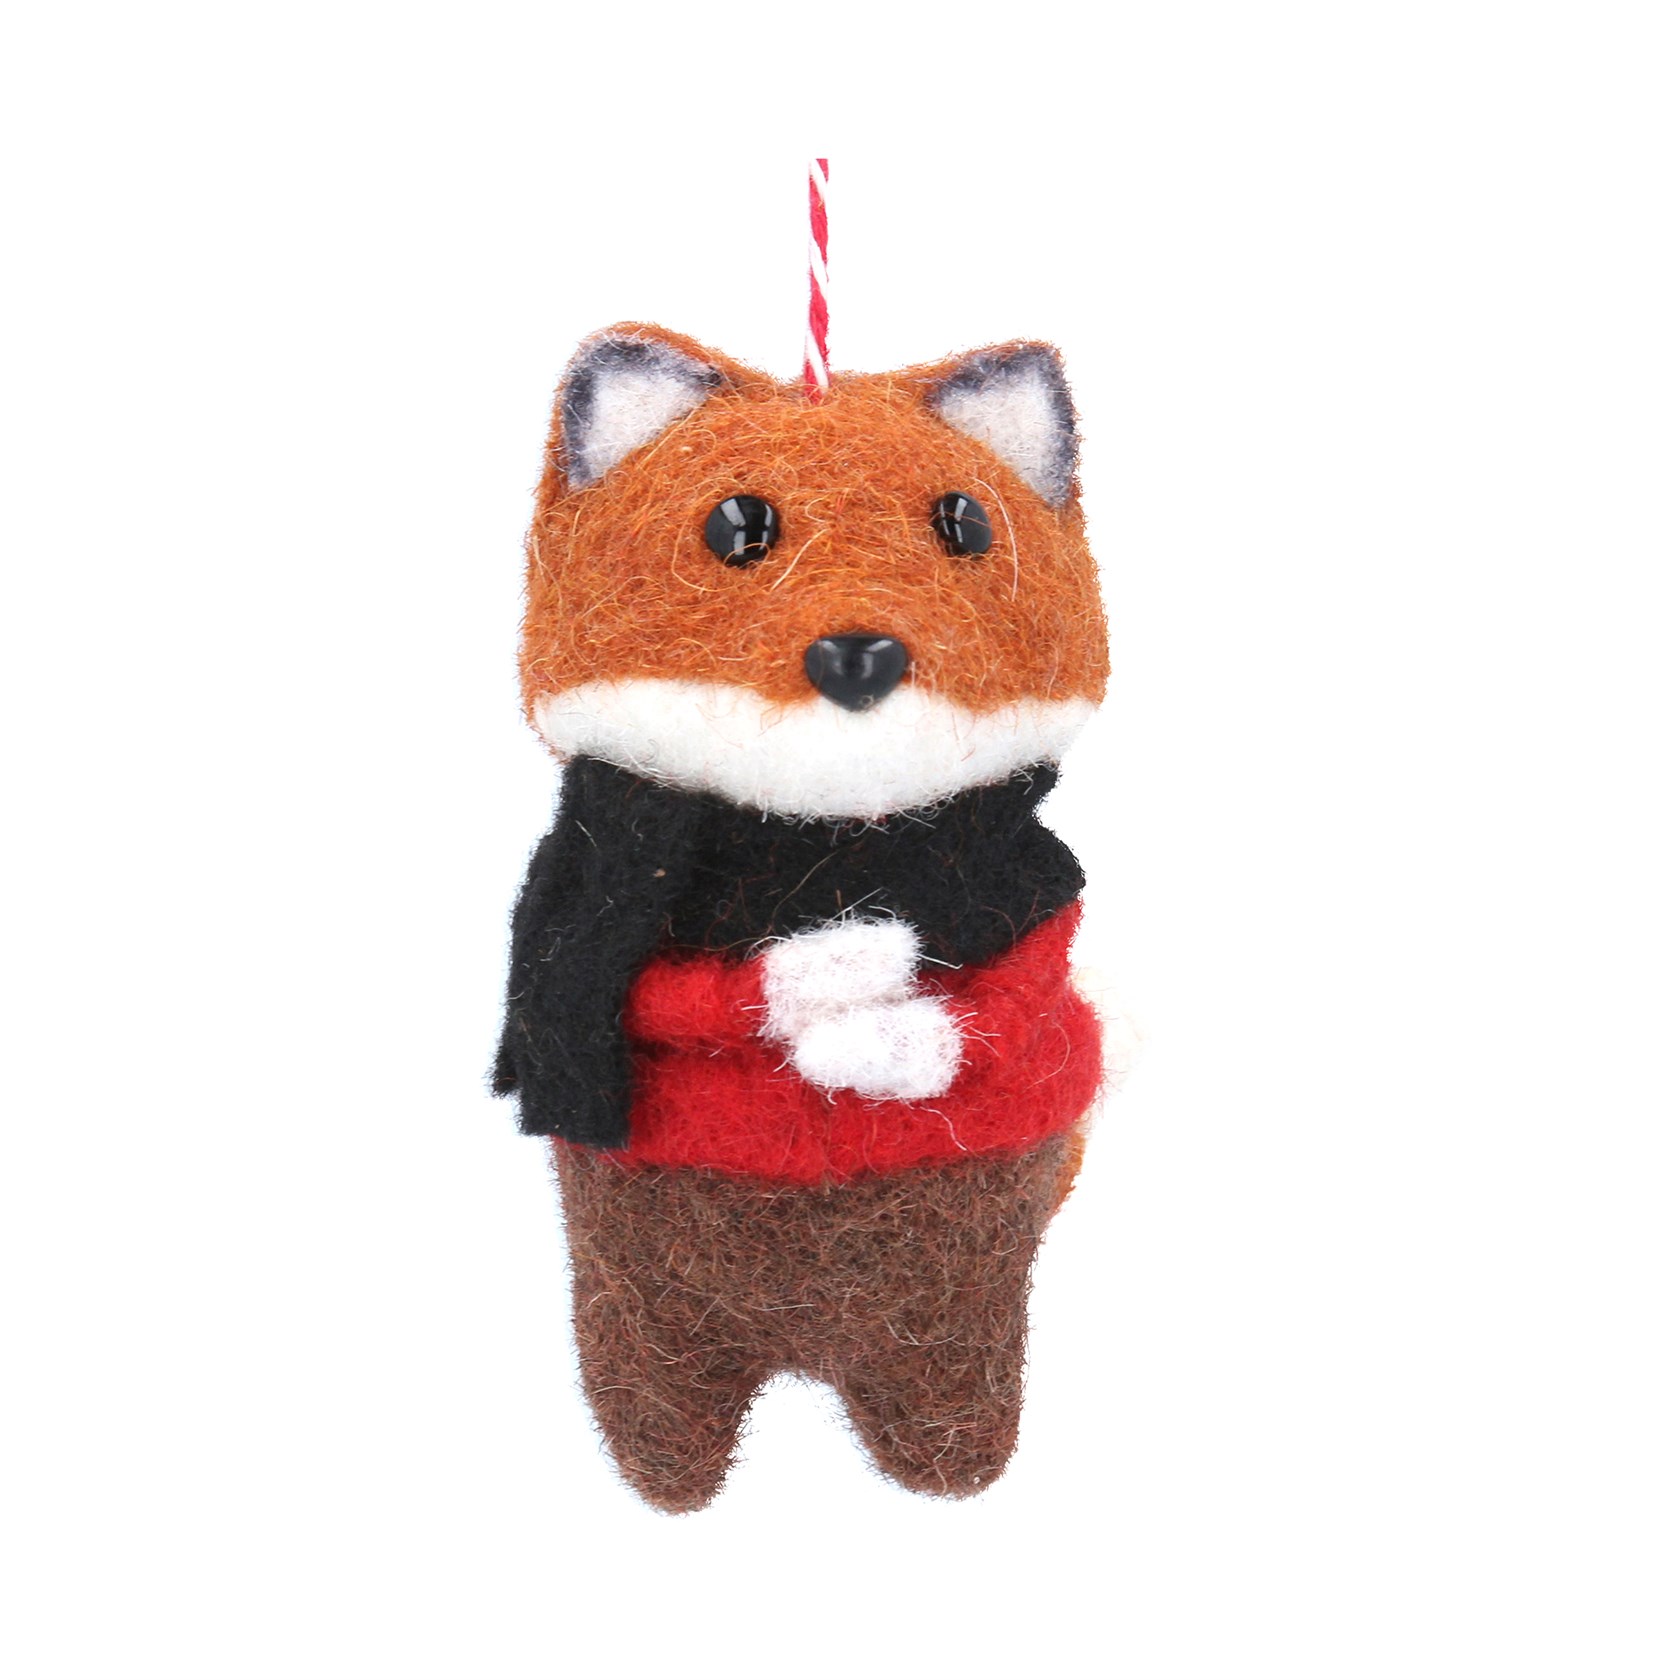 Wool fox with bow tie and jumper hanging Christmas decoration. By Gisela Graham. The perfect festive addition to your home.